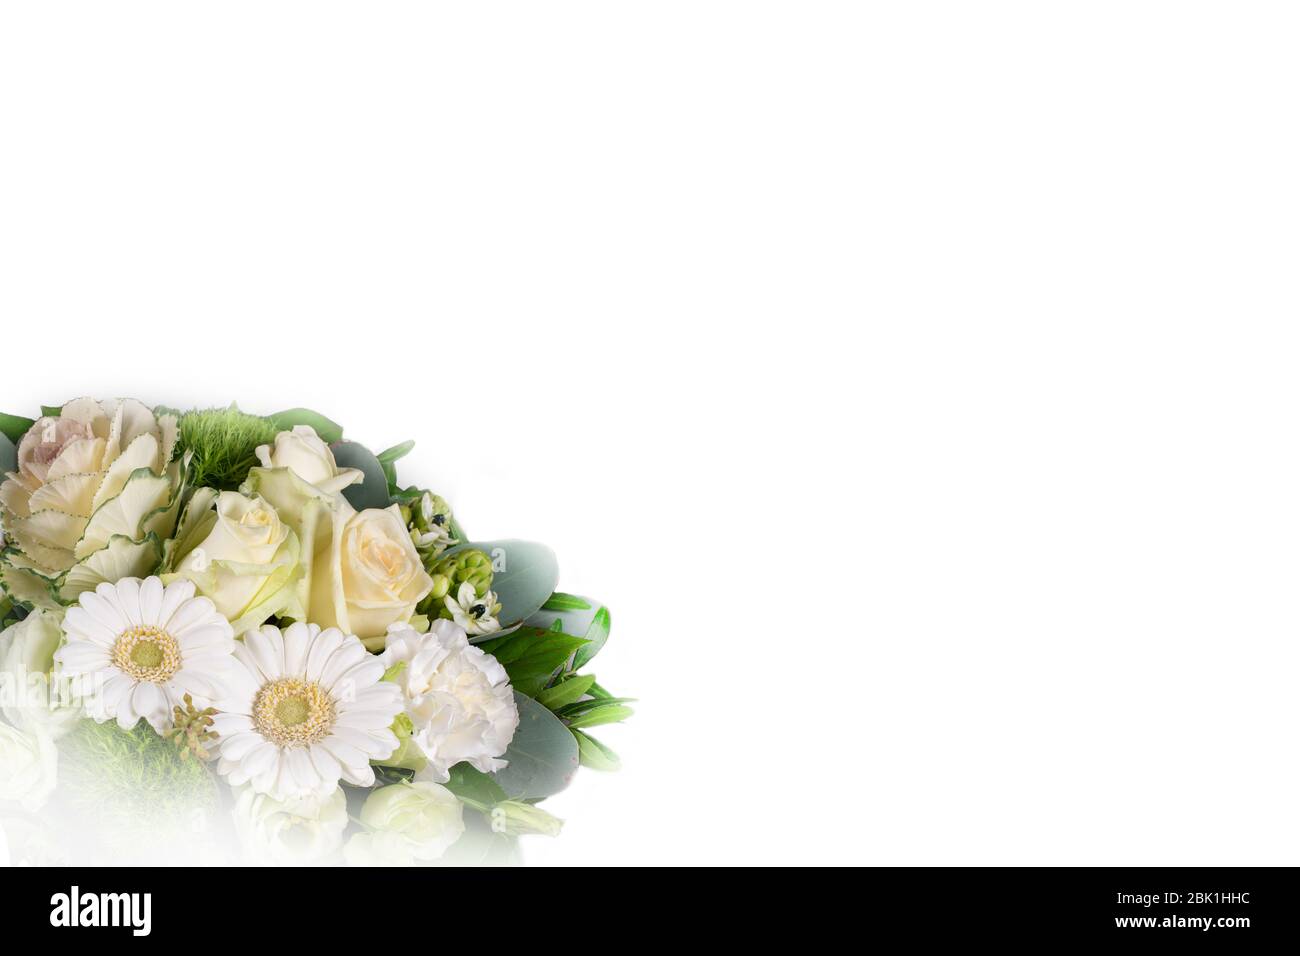 Bouquet of white flowers isolated on white background. Stock Photo